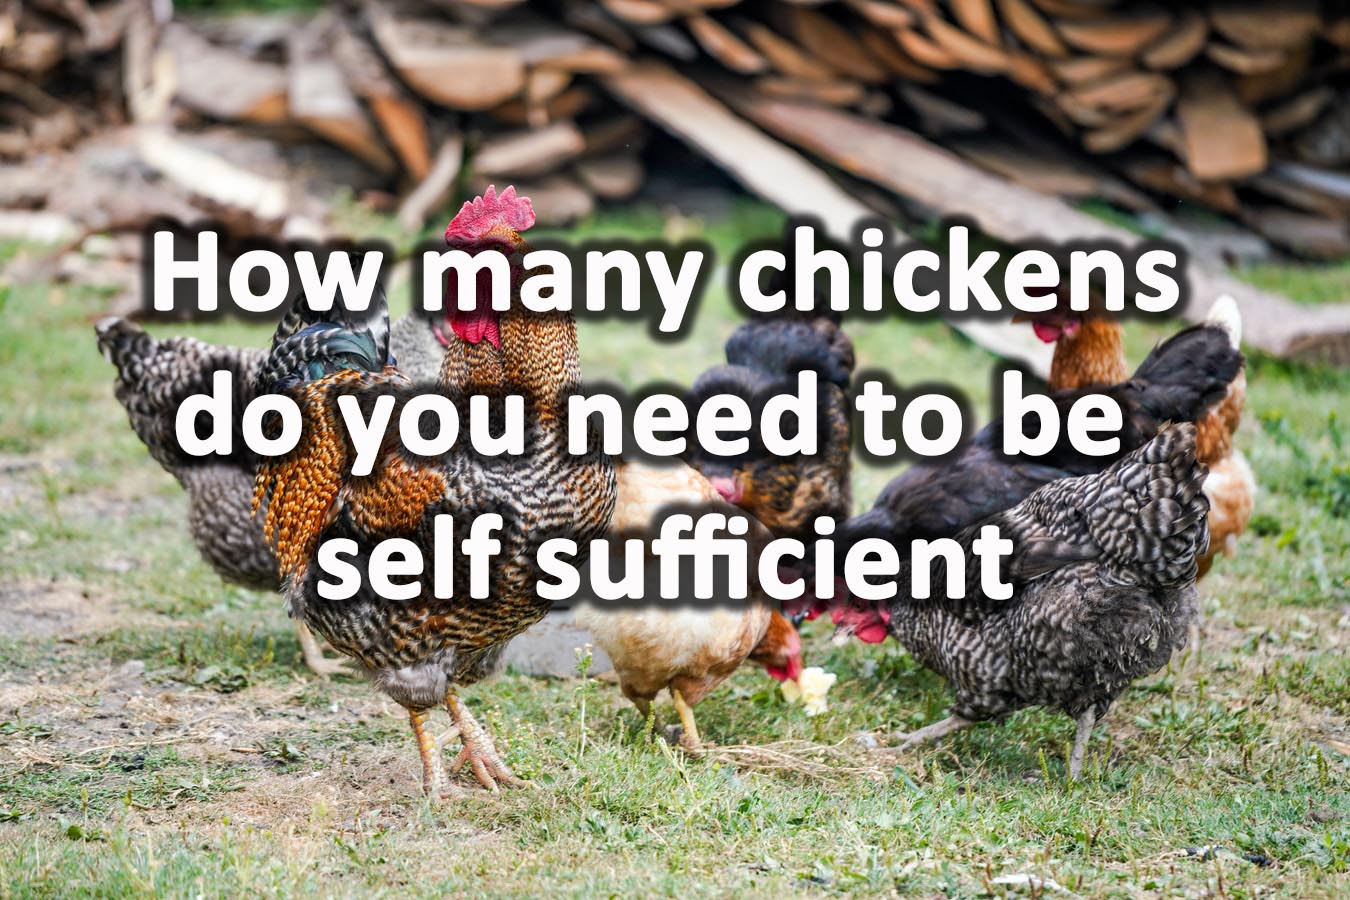 How many chickens do you need to be self sufficient? – Self Sufficient